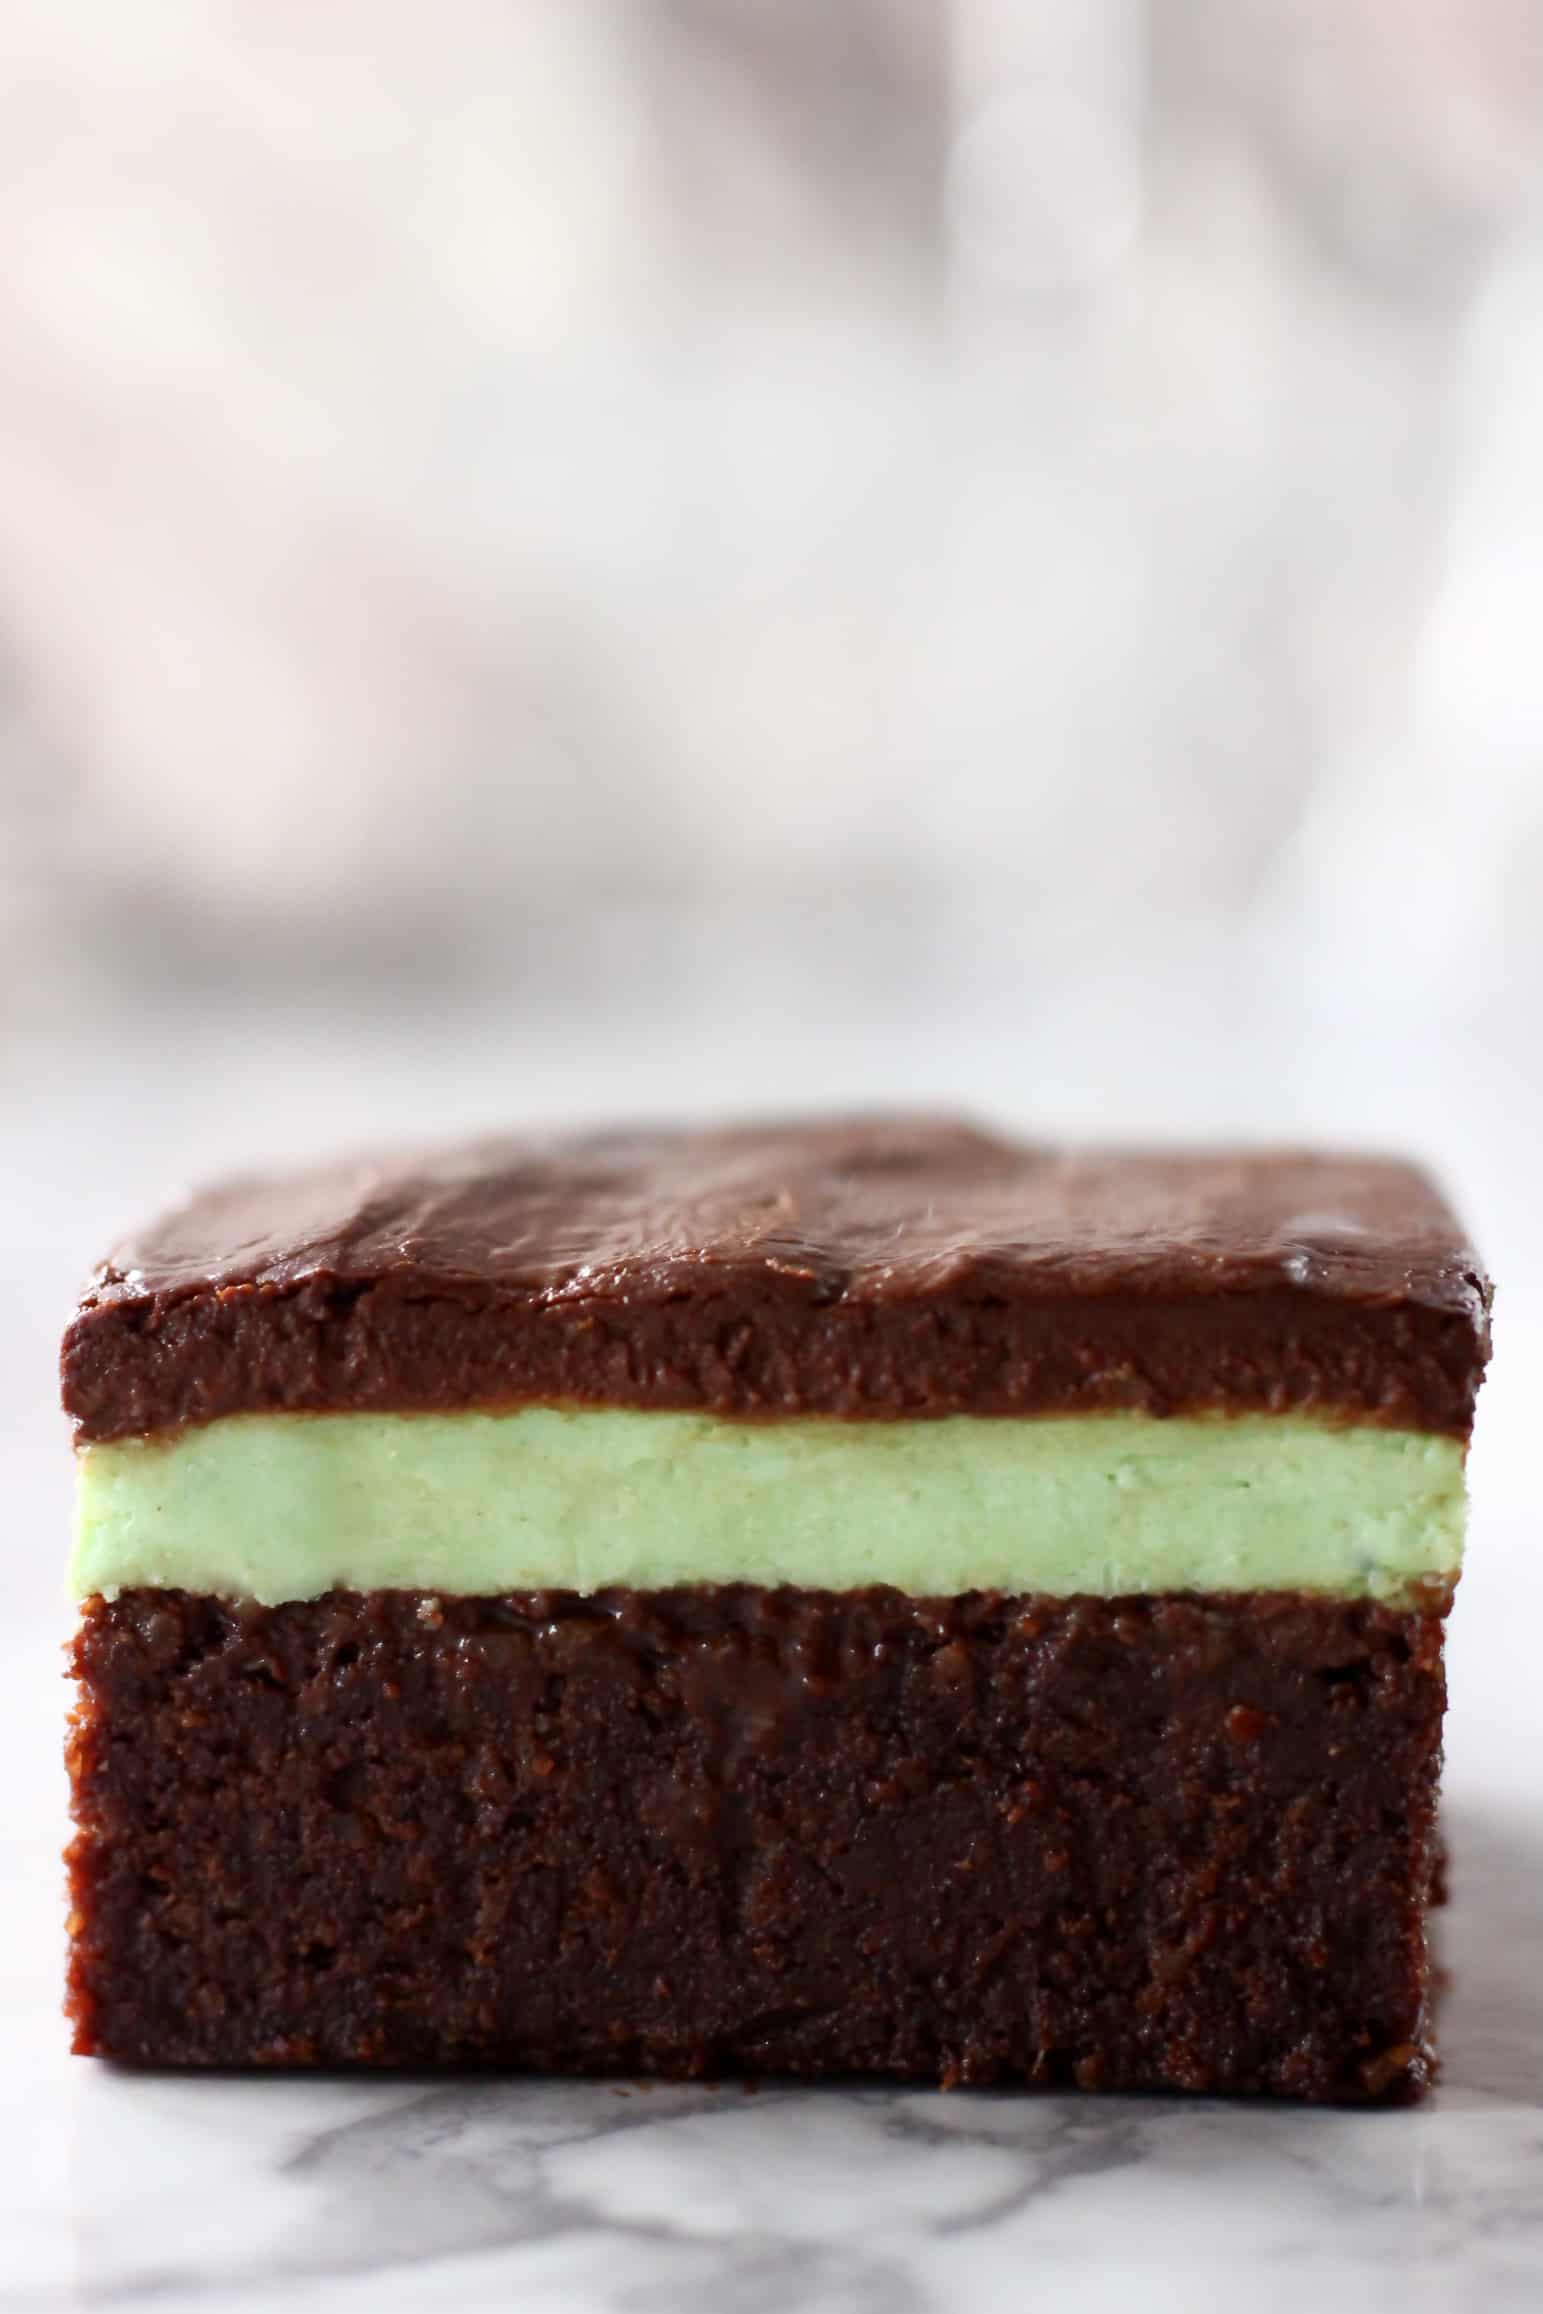 A brownie with green peppermint cream and chocolate ganache